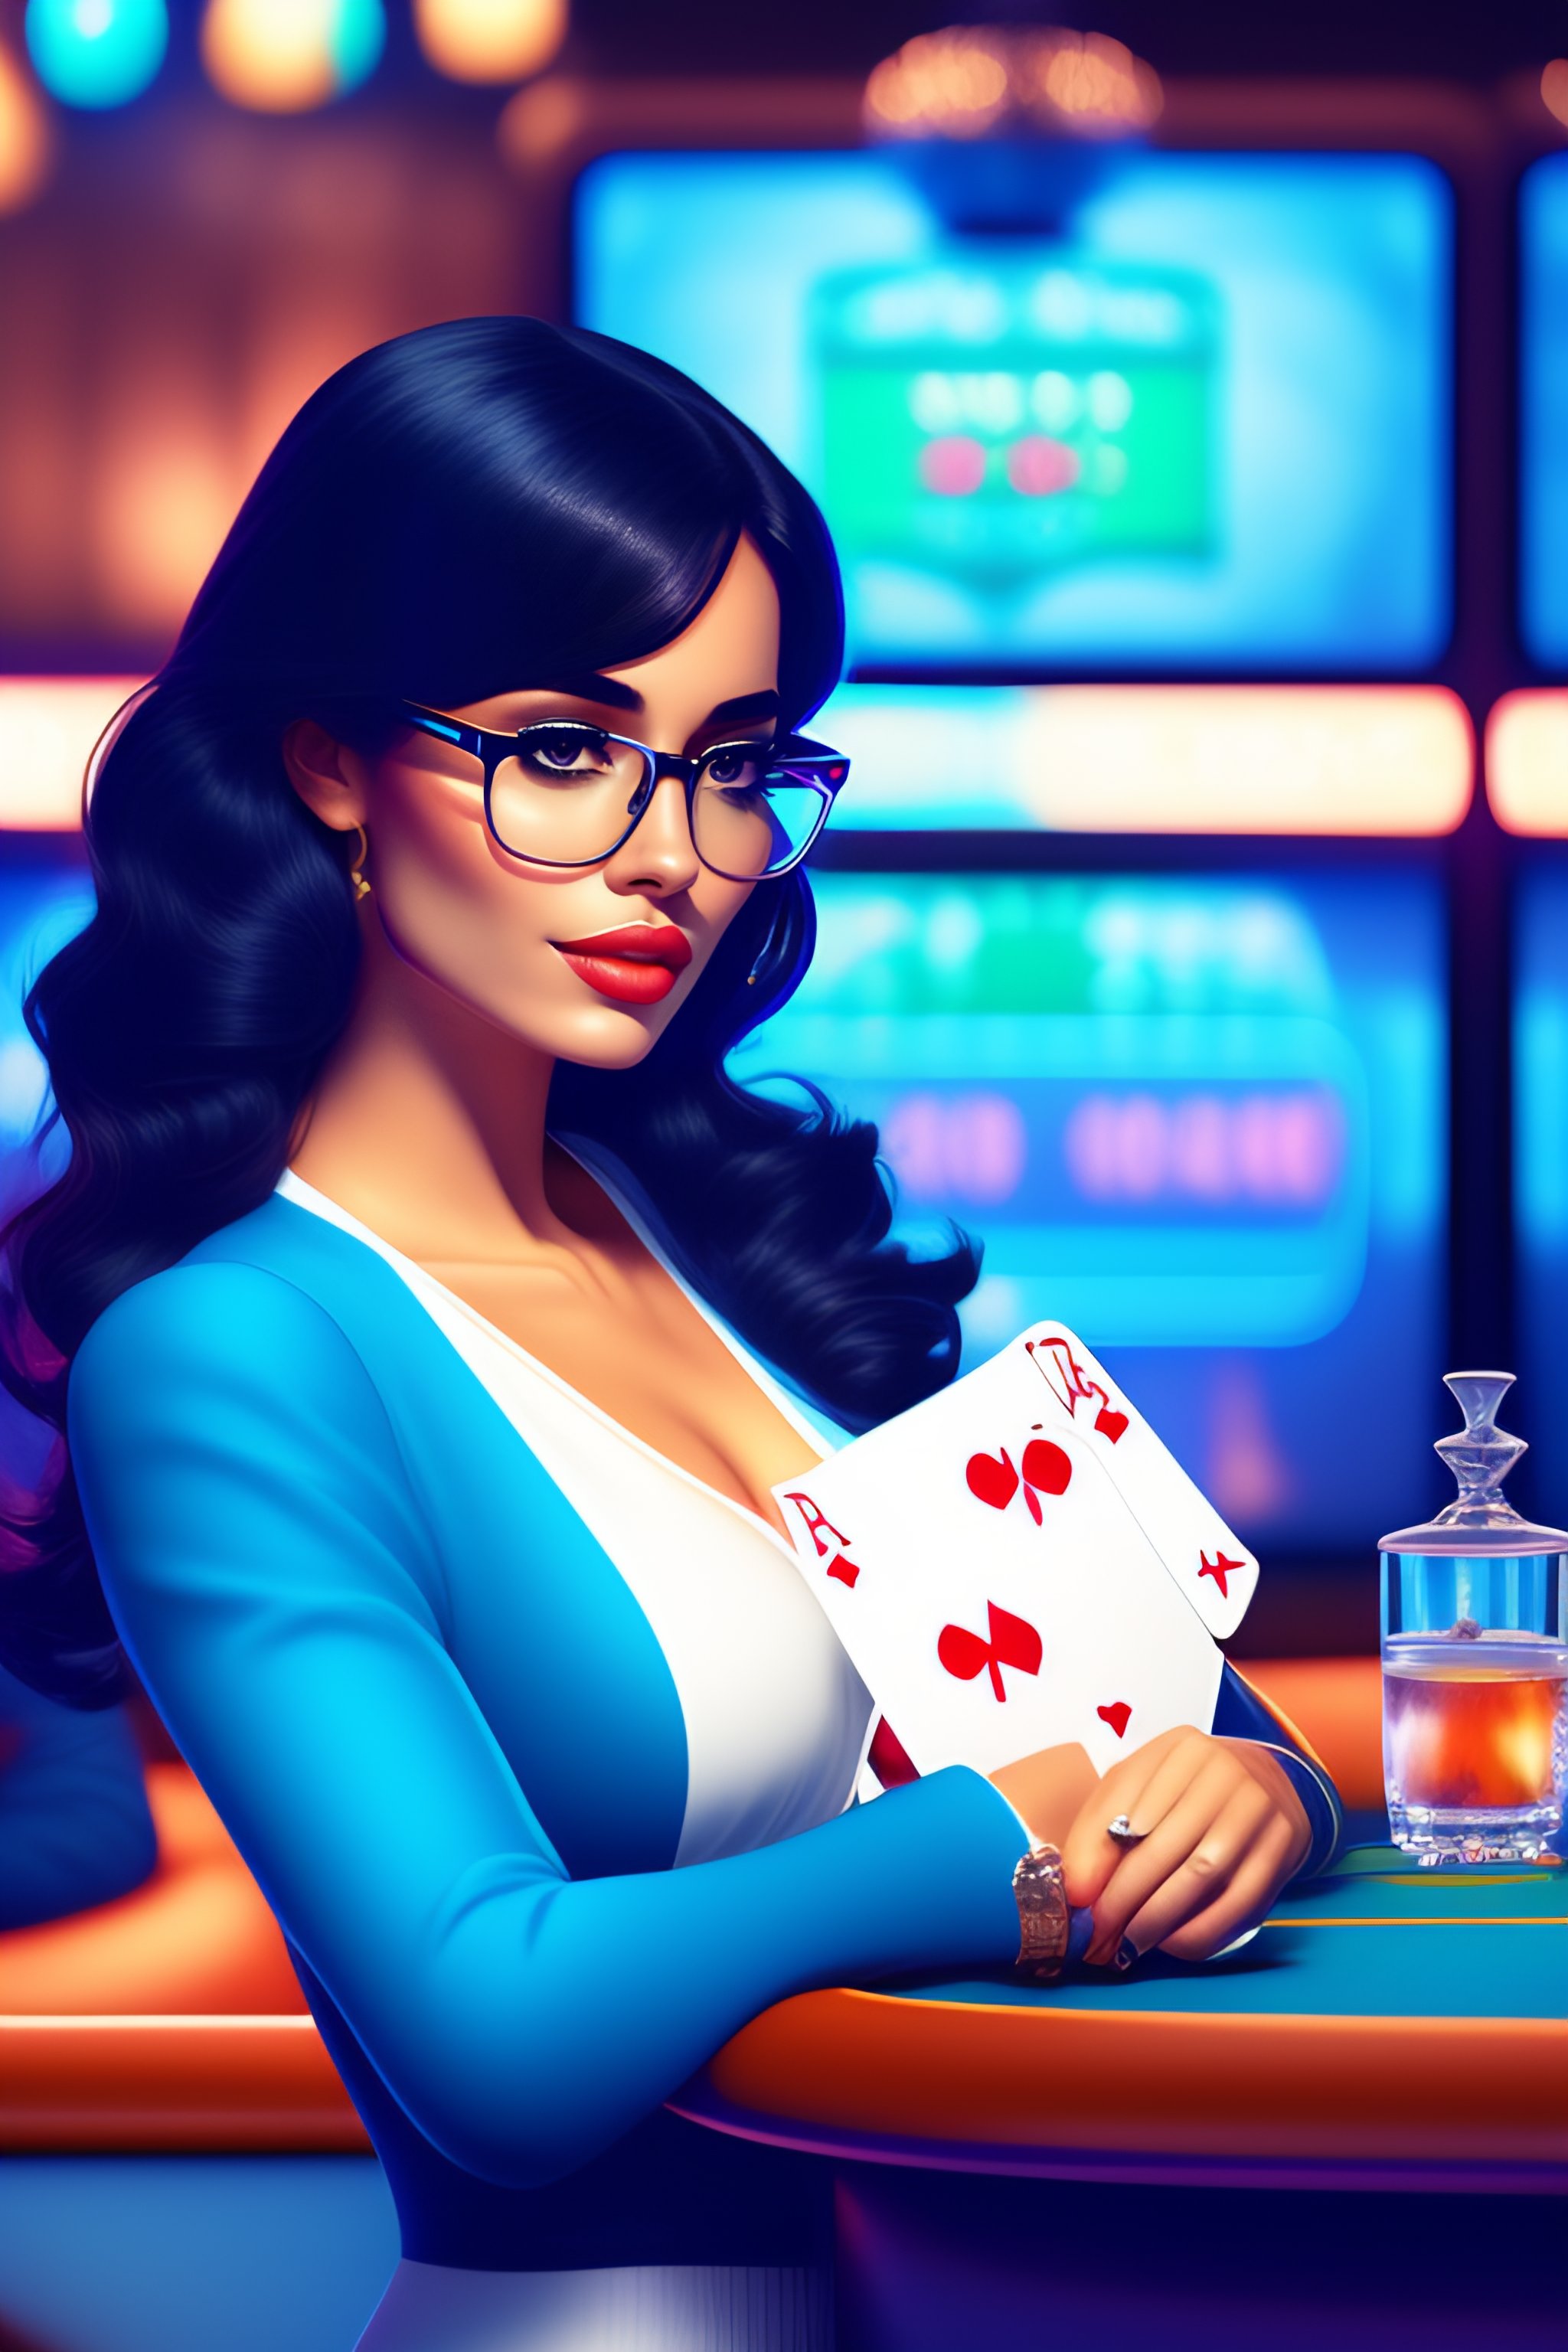 Lexica - drinking blue by hair black girl tonic sitting in table background with c a Cute inside gin poker casino black a glasses wayfarer sweater